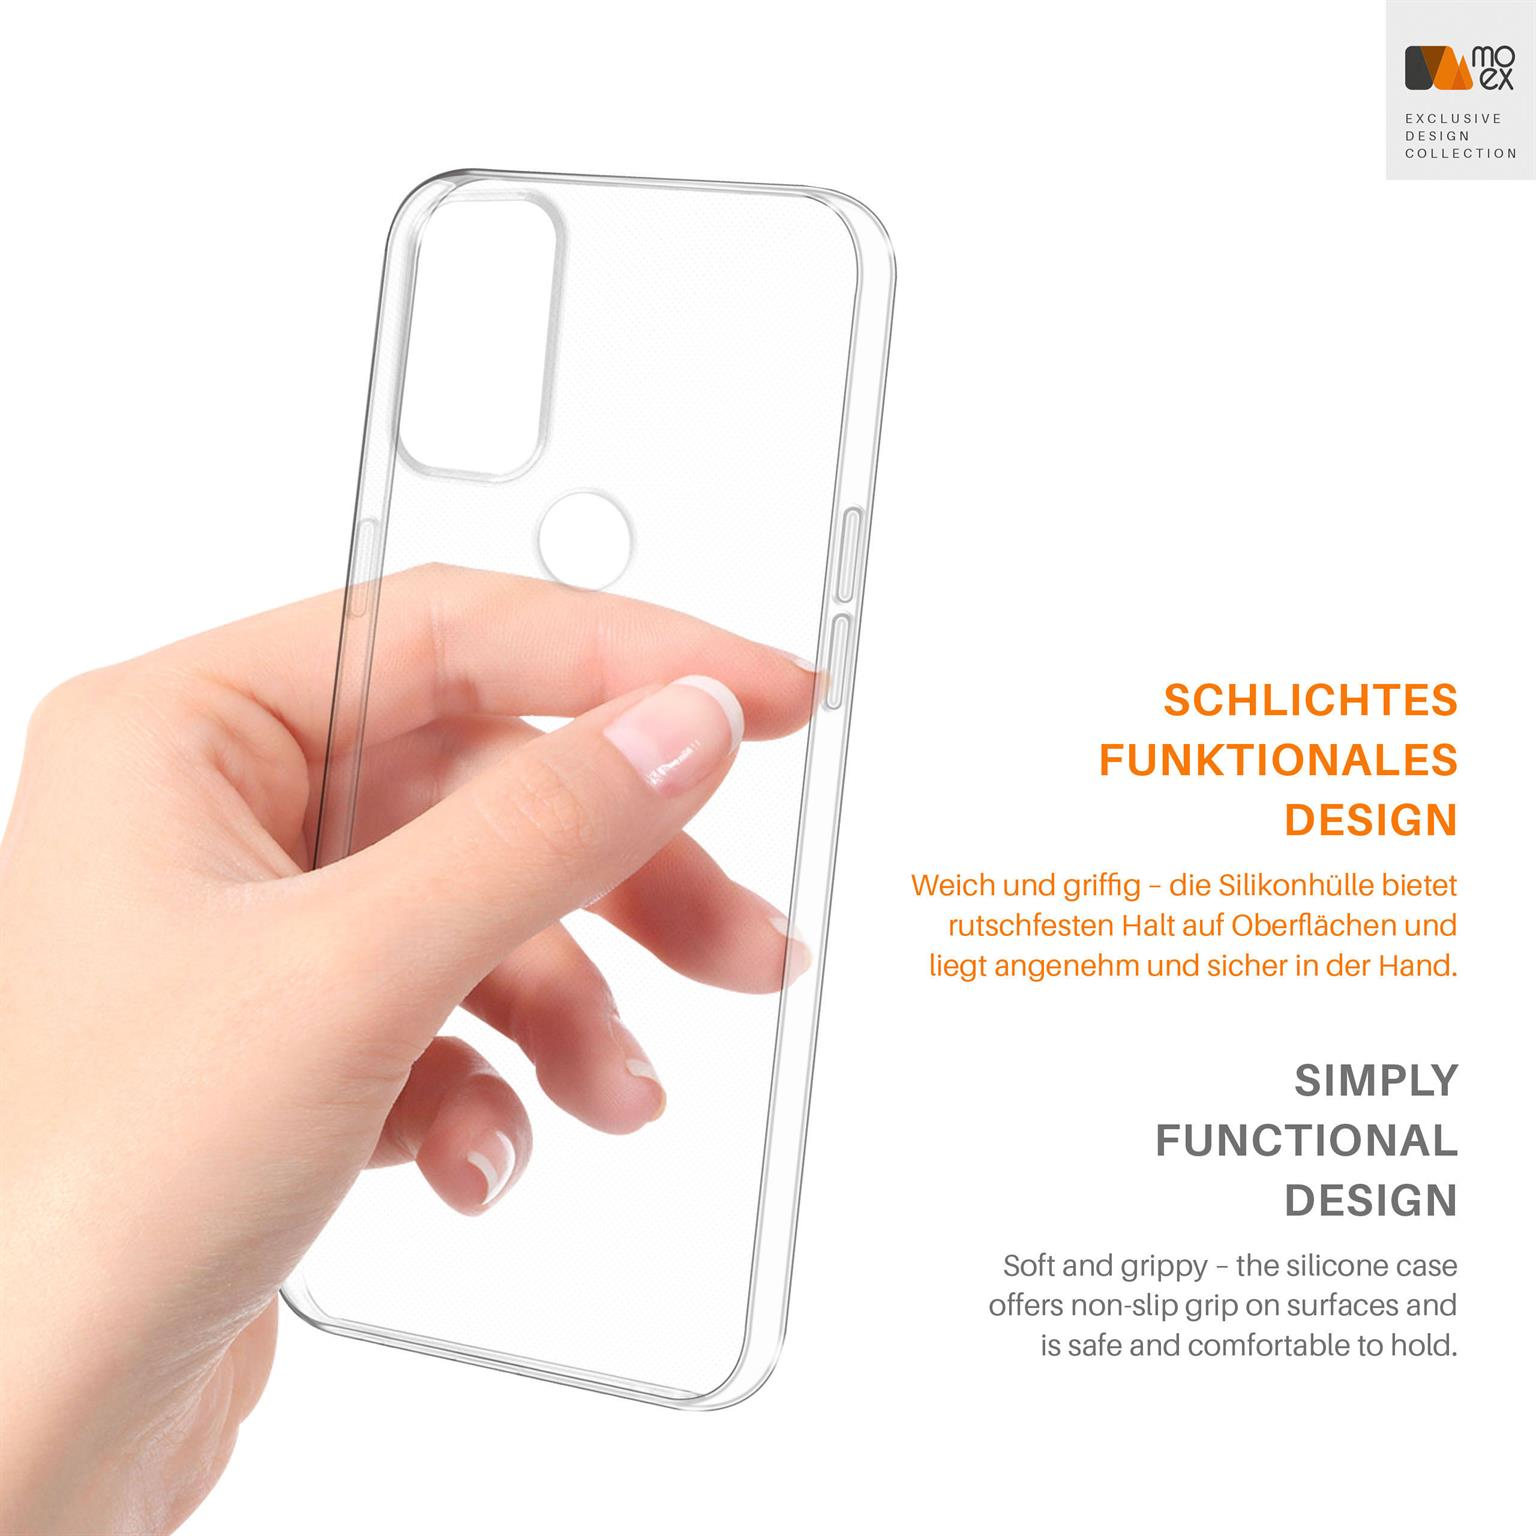 Backcover, Crystal-Clear OnePlus, Nord Case, N10 Aero 5G, MOEX